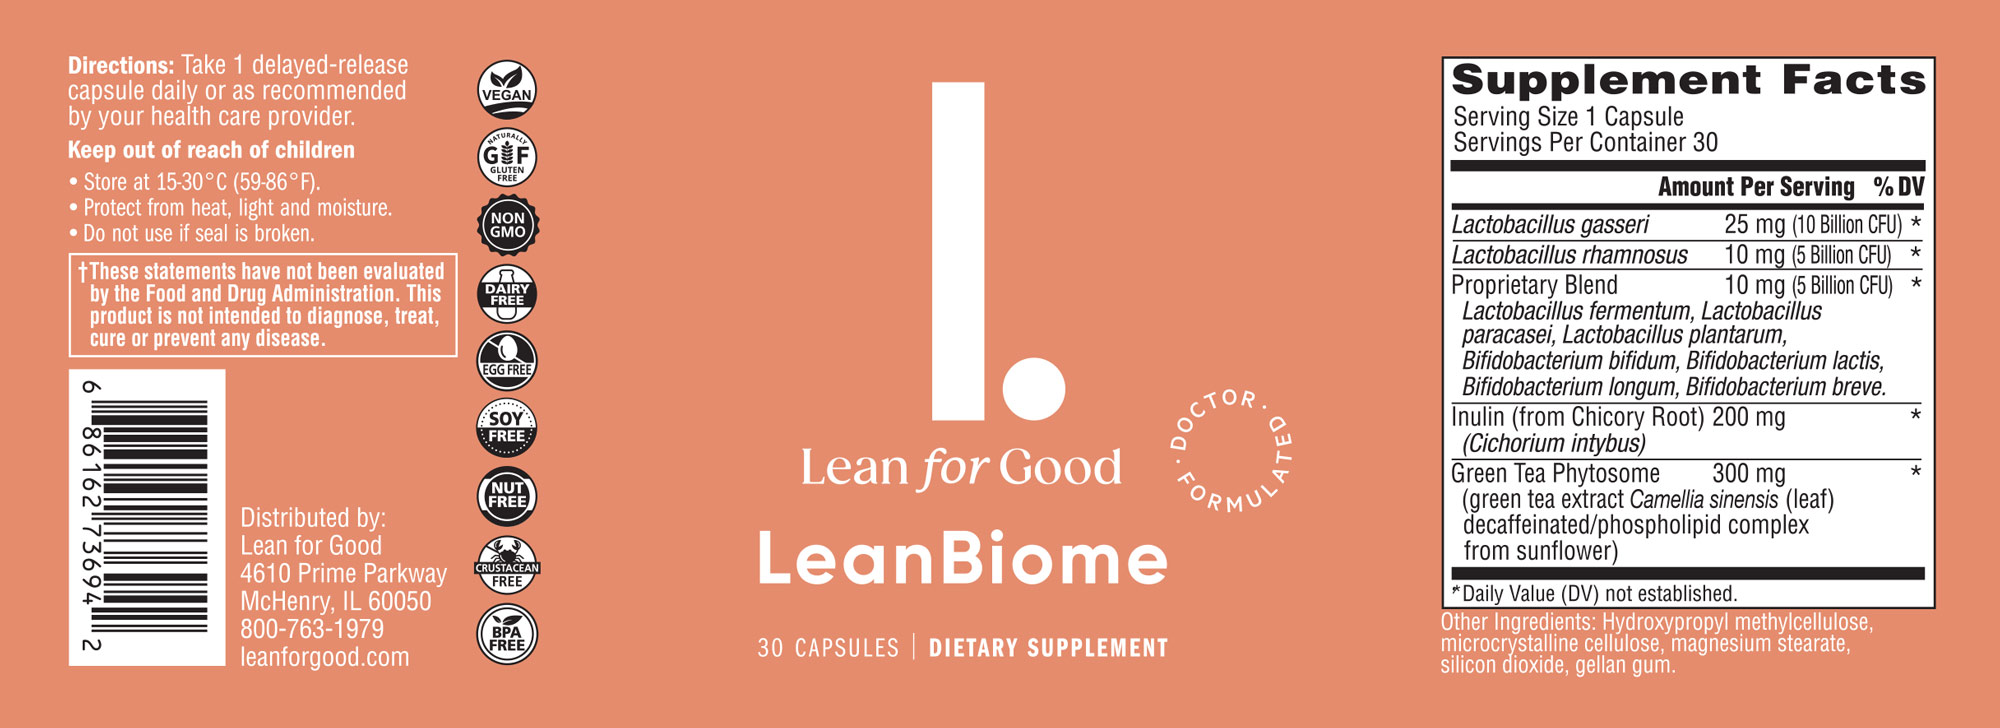 Lean For Good LeanBiome Supplement Facts